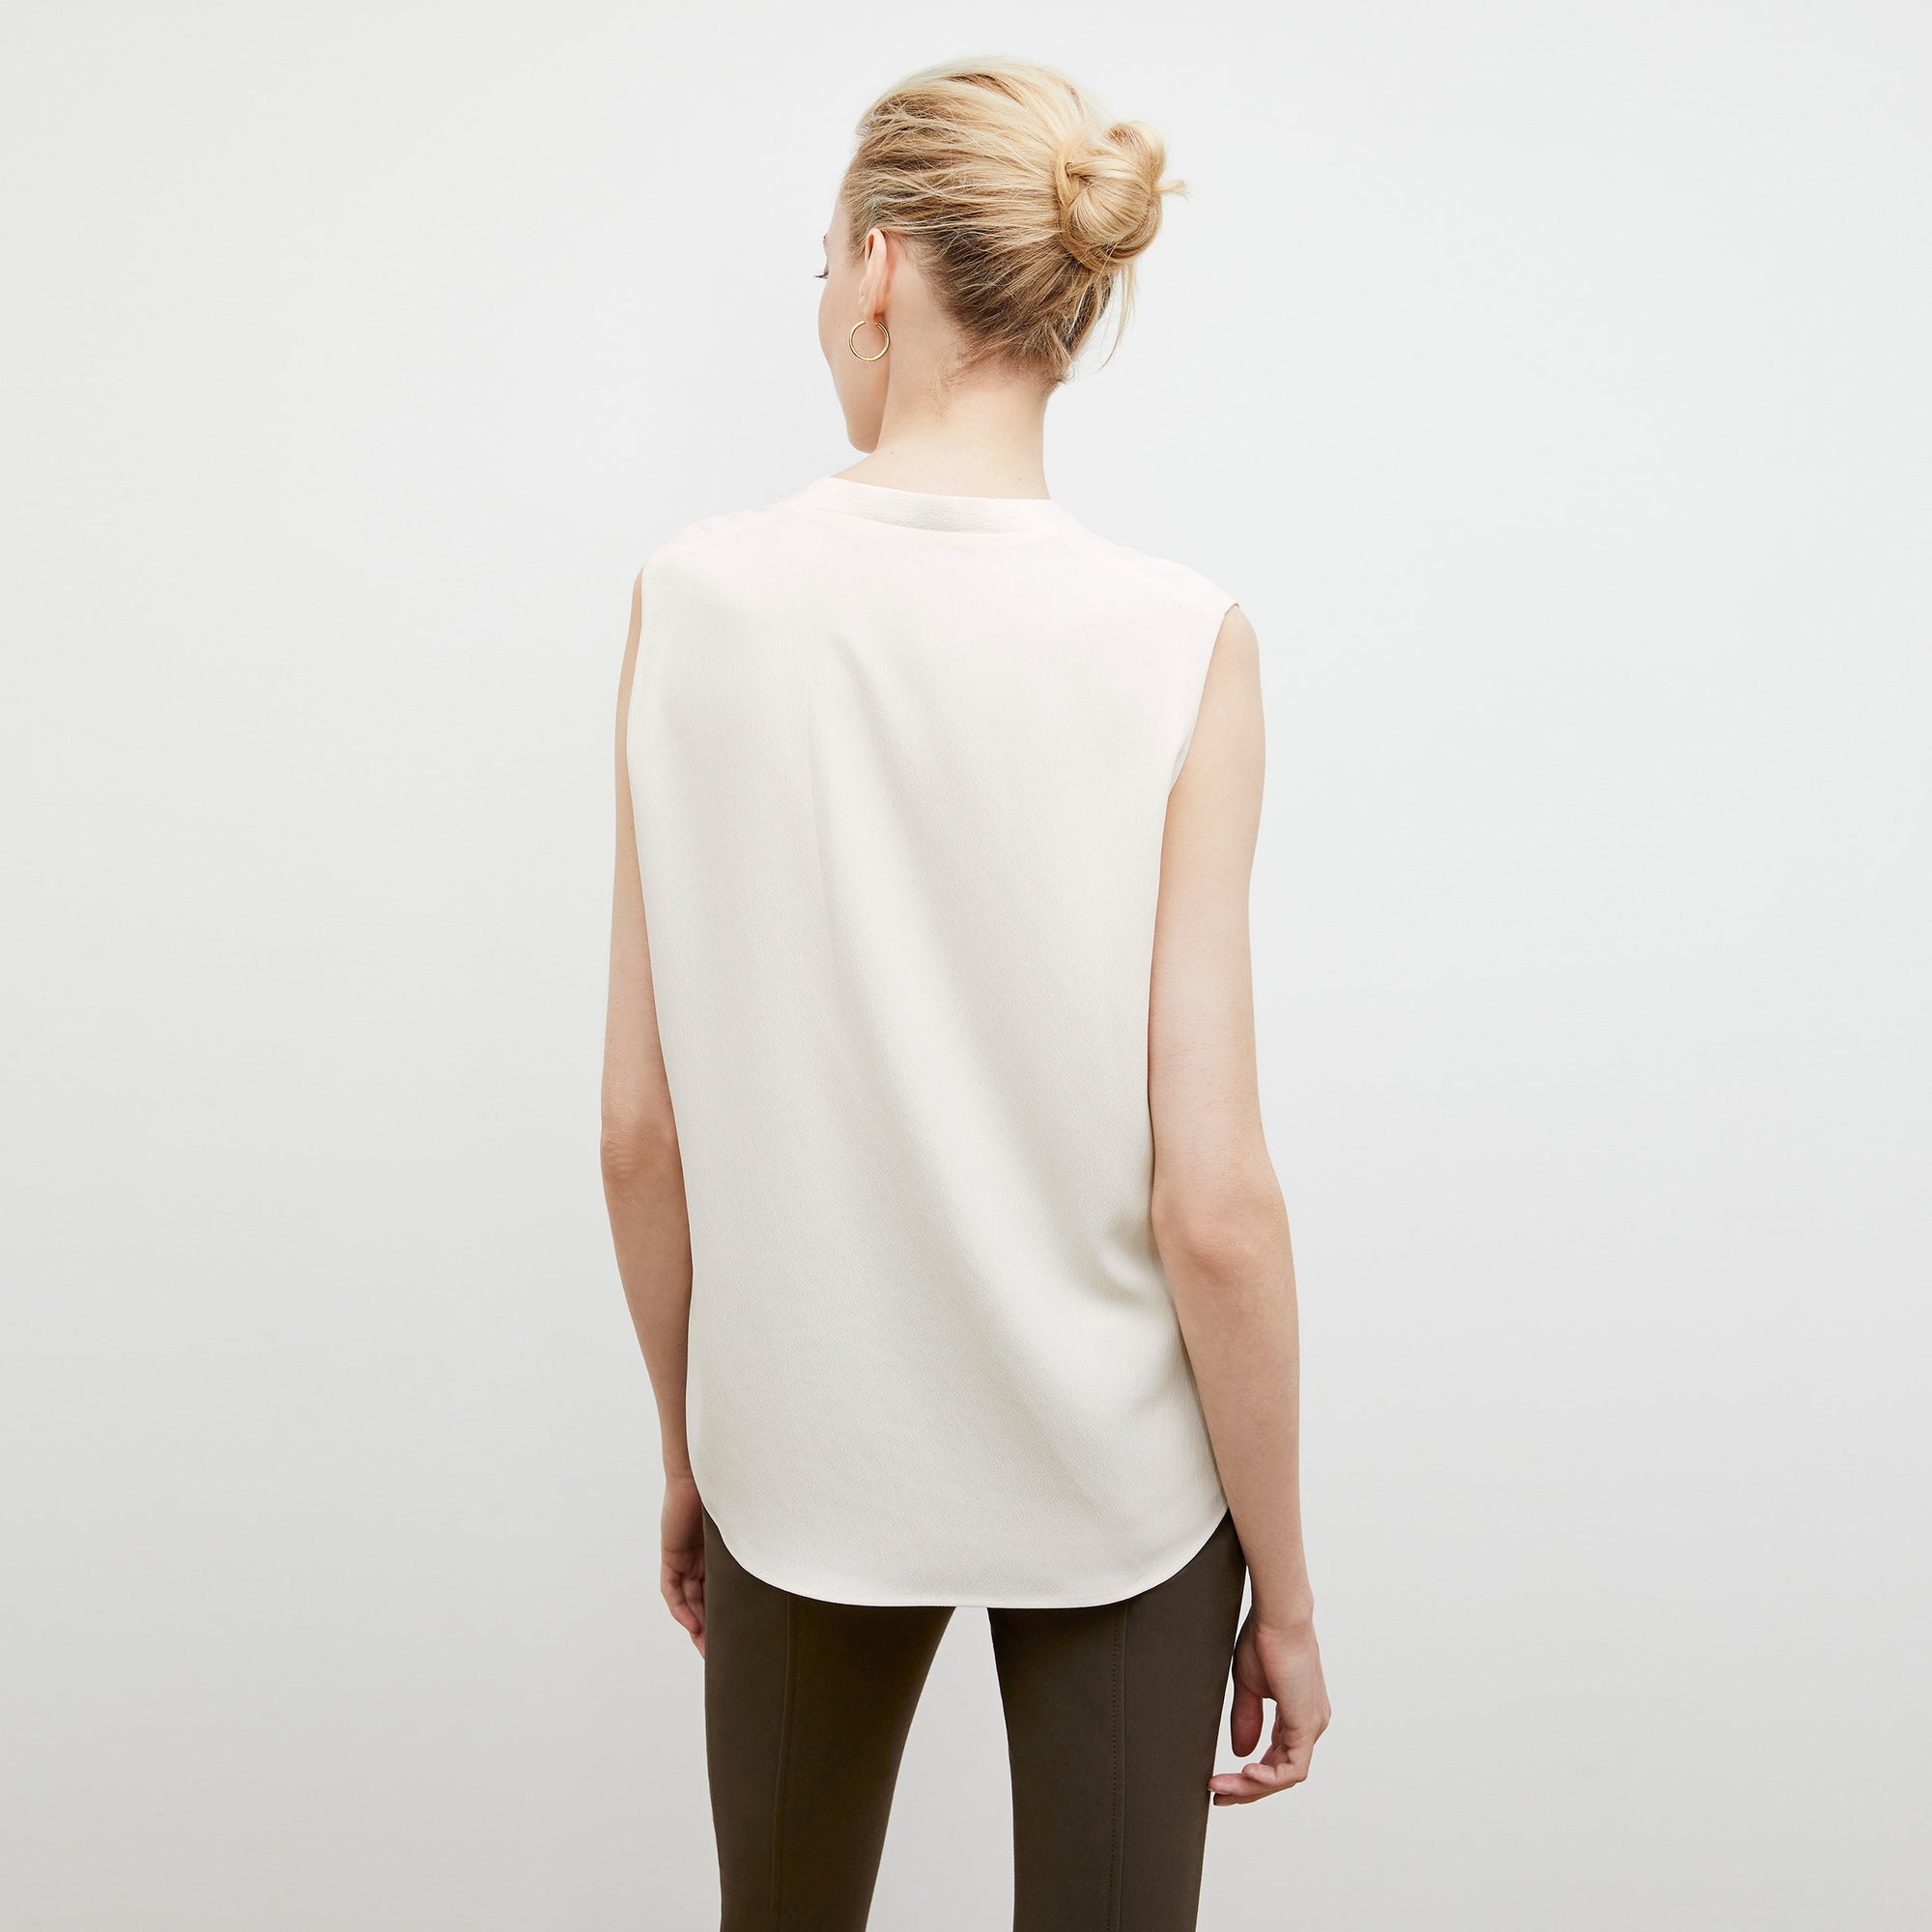 Back image of a woman wearing the Emmy Top in Alabaster